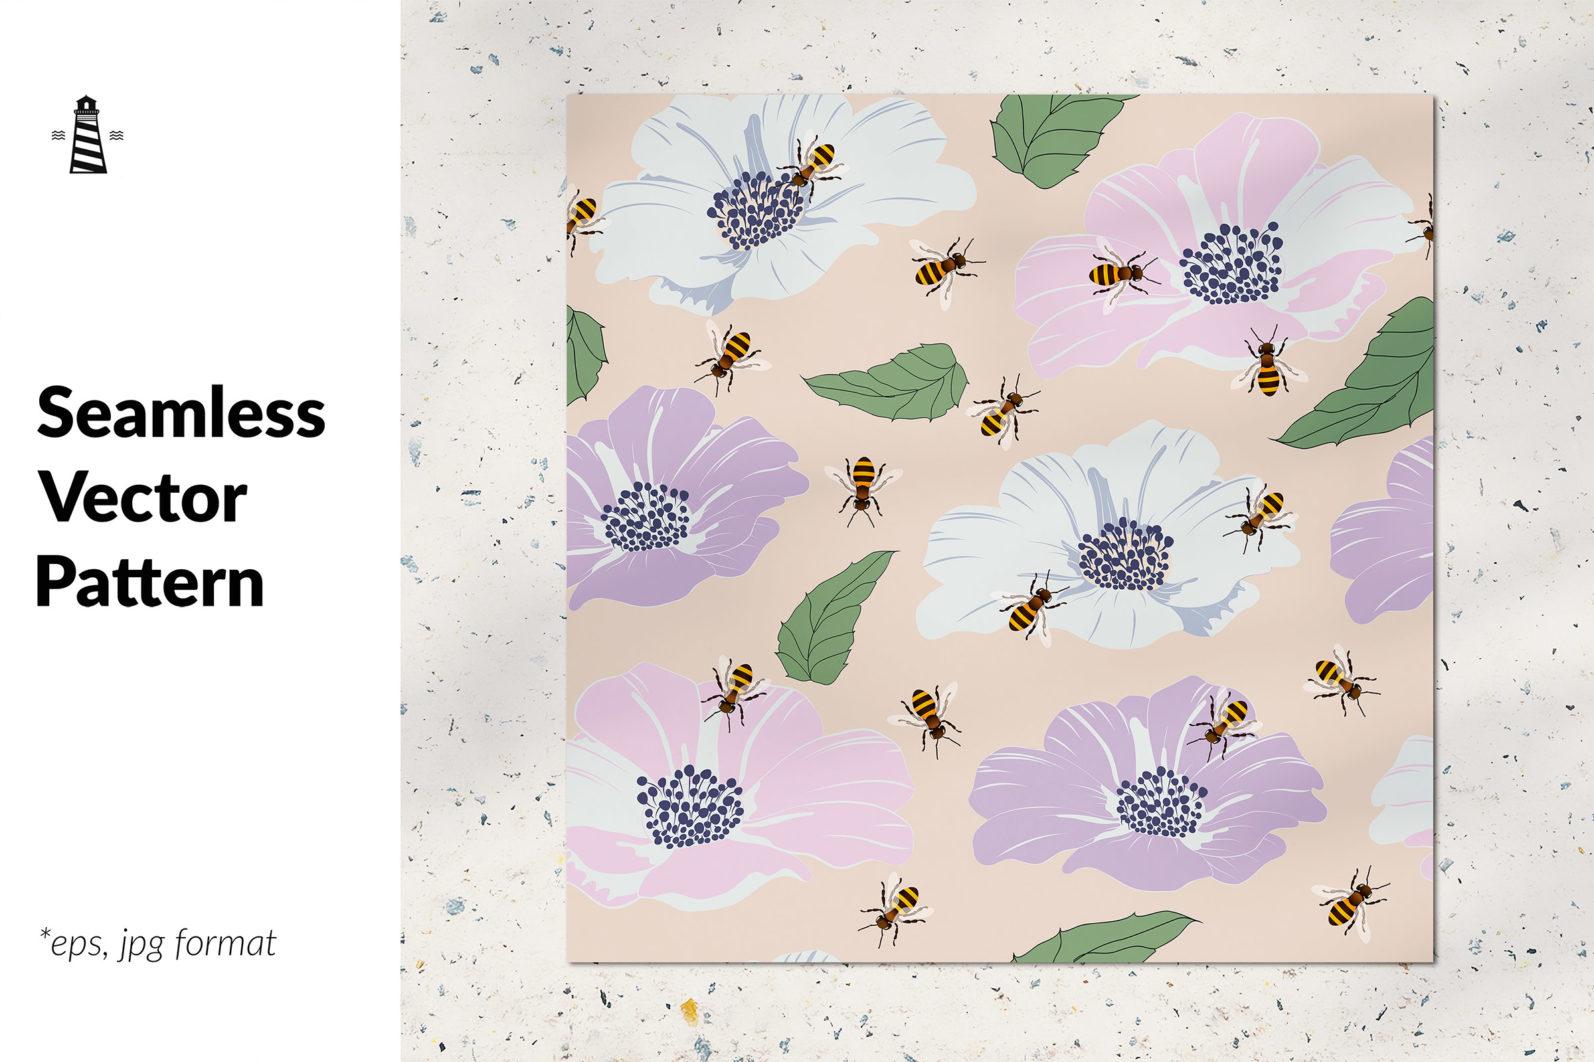 Busy bees and flowers patten - CREATIVE MARKET 43 -